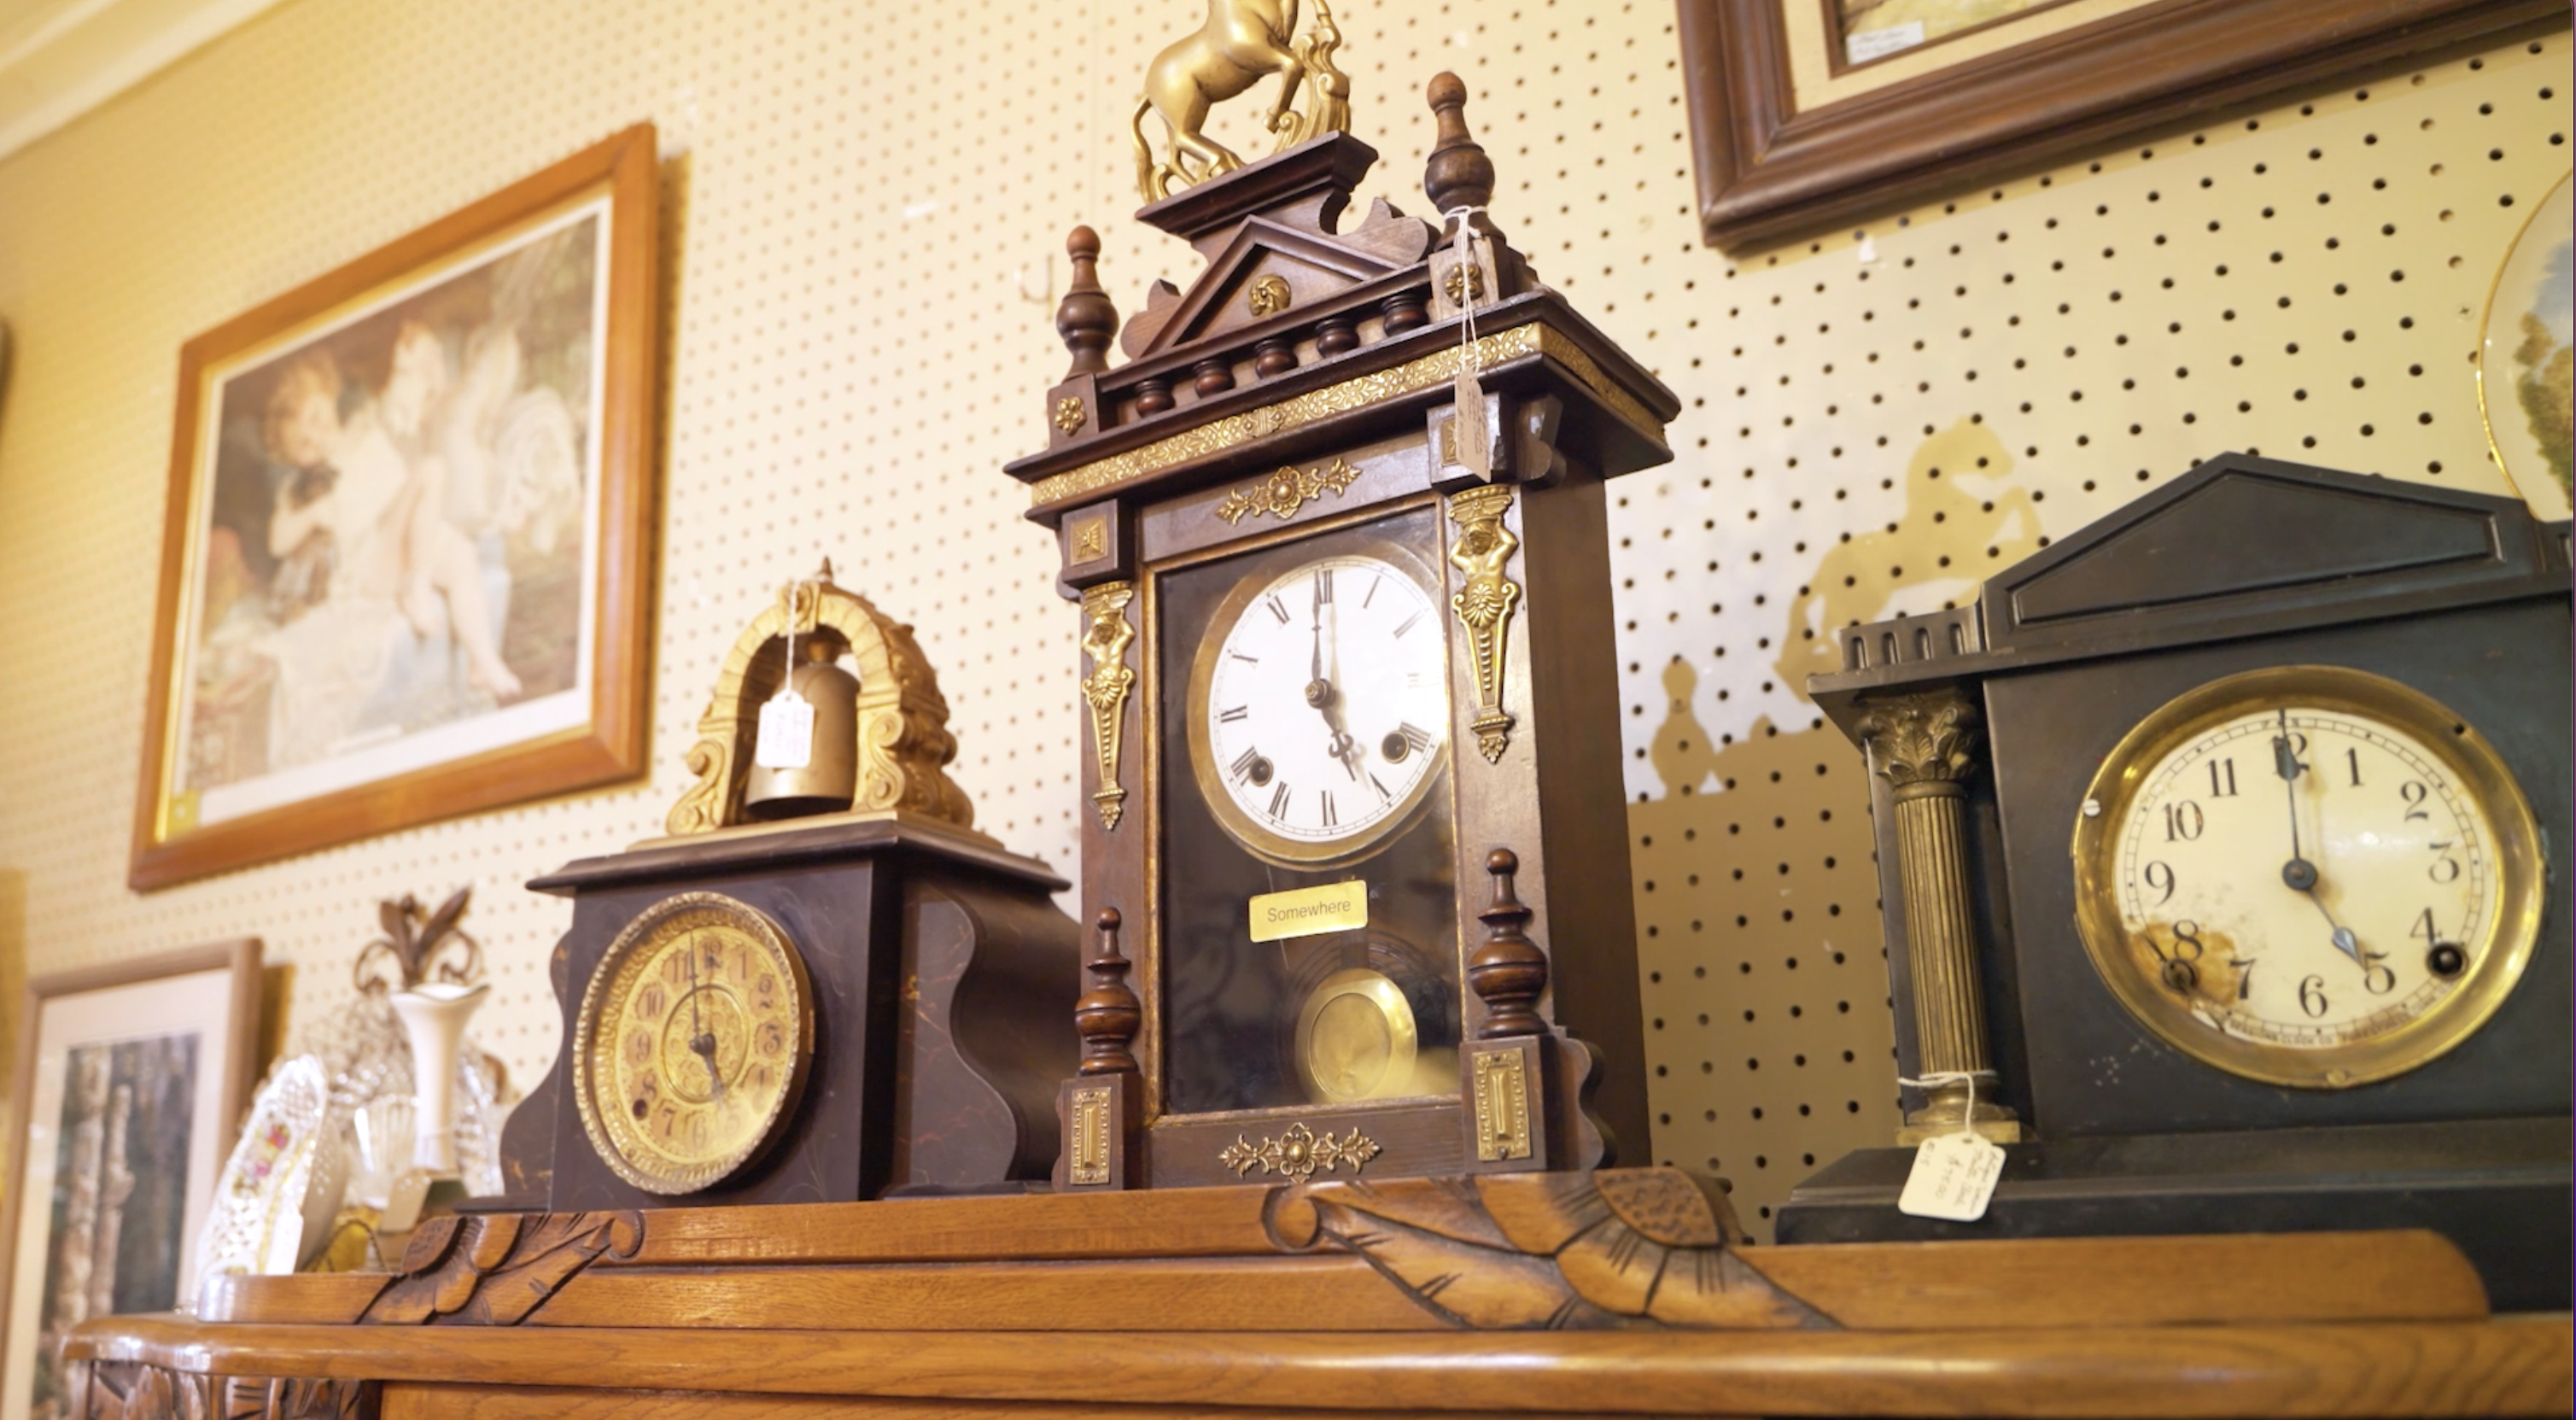 Montgomery Antique Shop Owner Thrilled for ‘New’ Addition to the Community